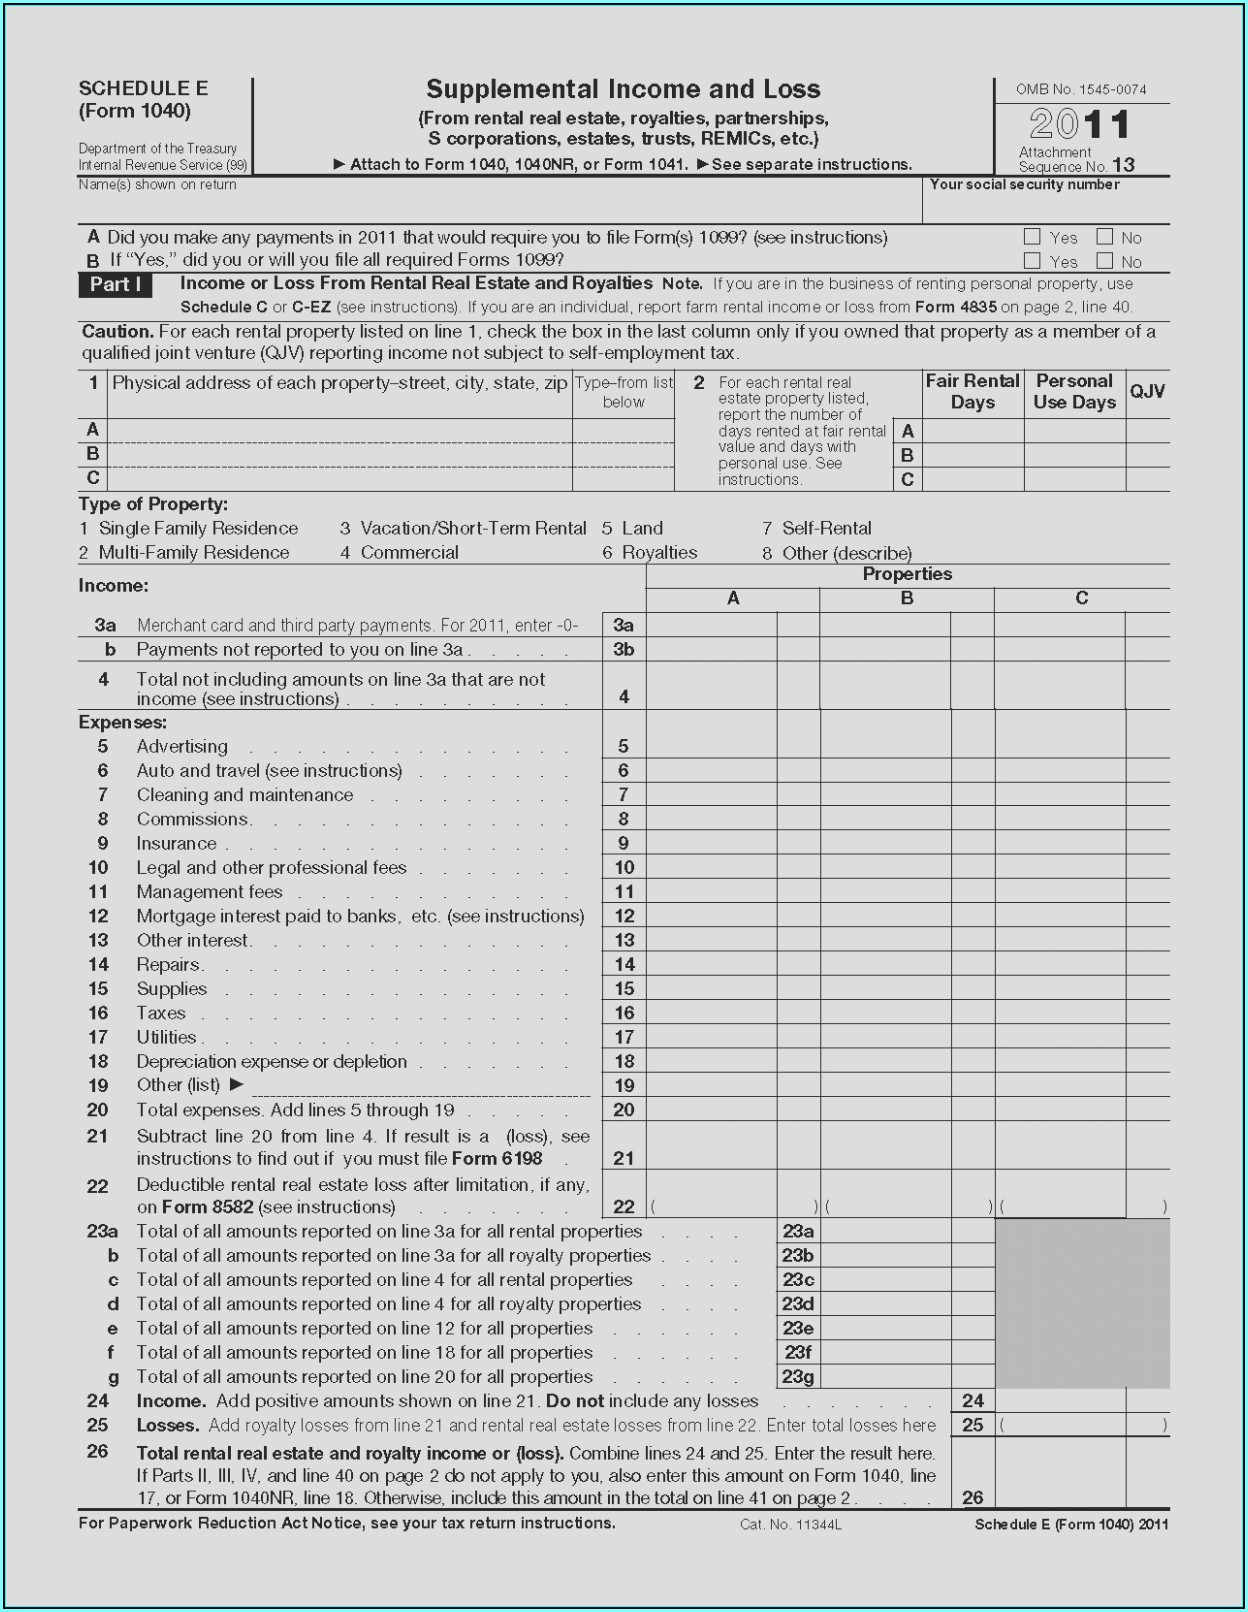 2014 Irs Tax Forms 1040ez Instructions